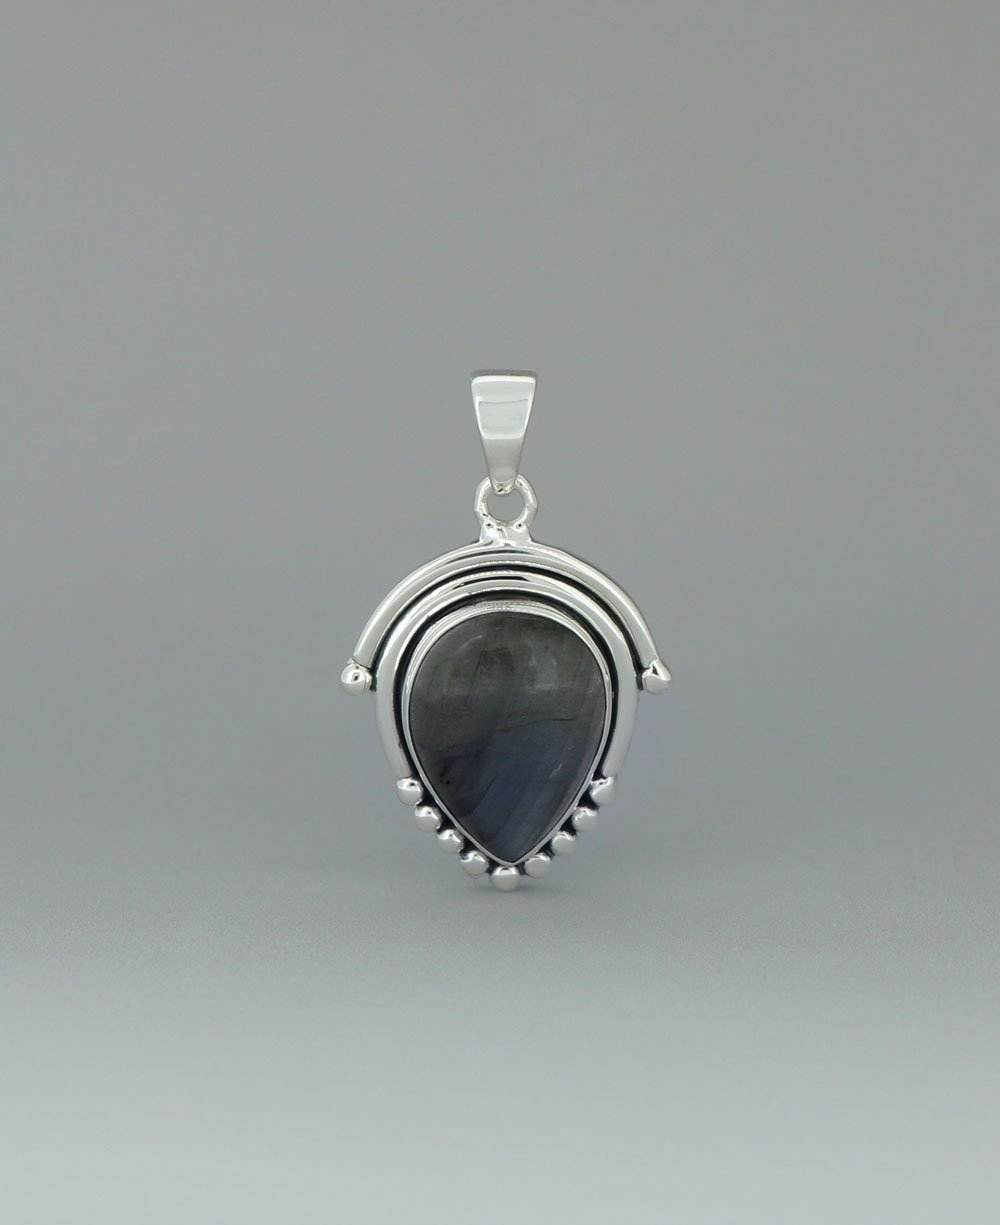 Premium Labradorite Inverted Teardrop Silver Pendant with Beaded Architectural Detailing - Charms & Pendants